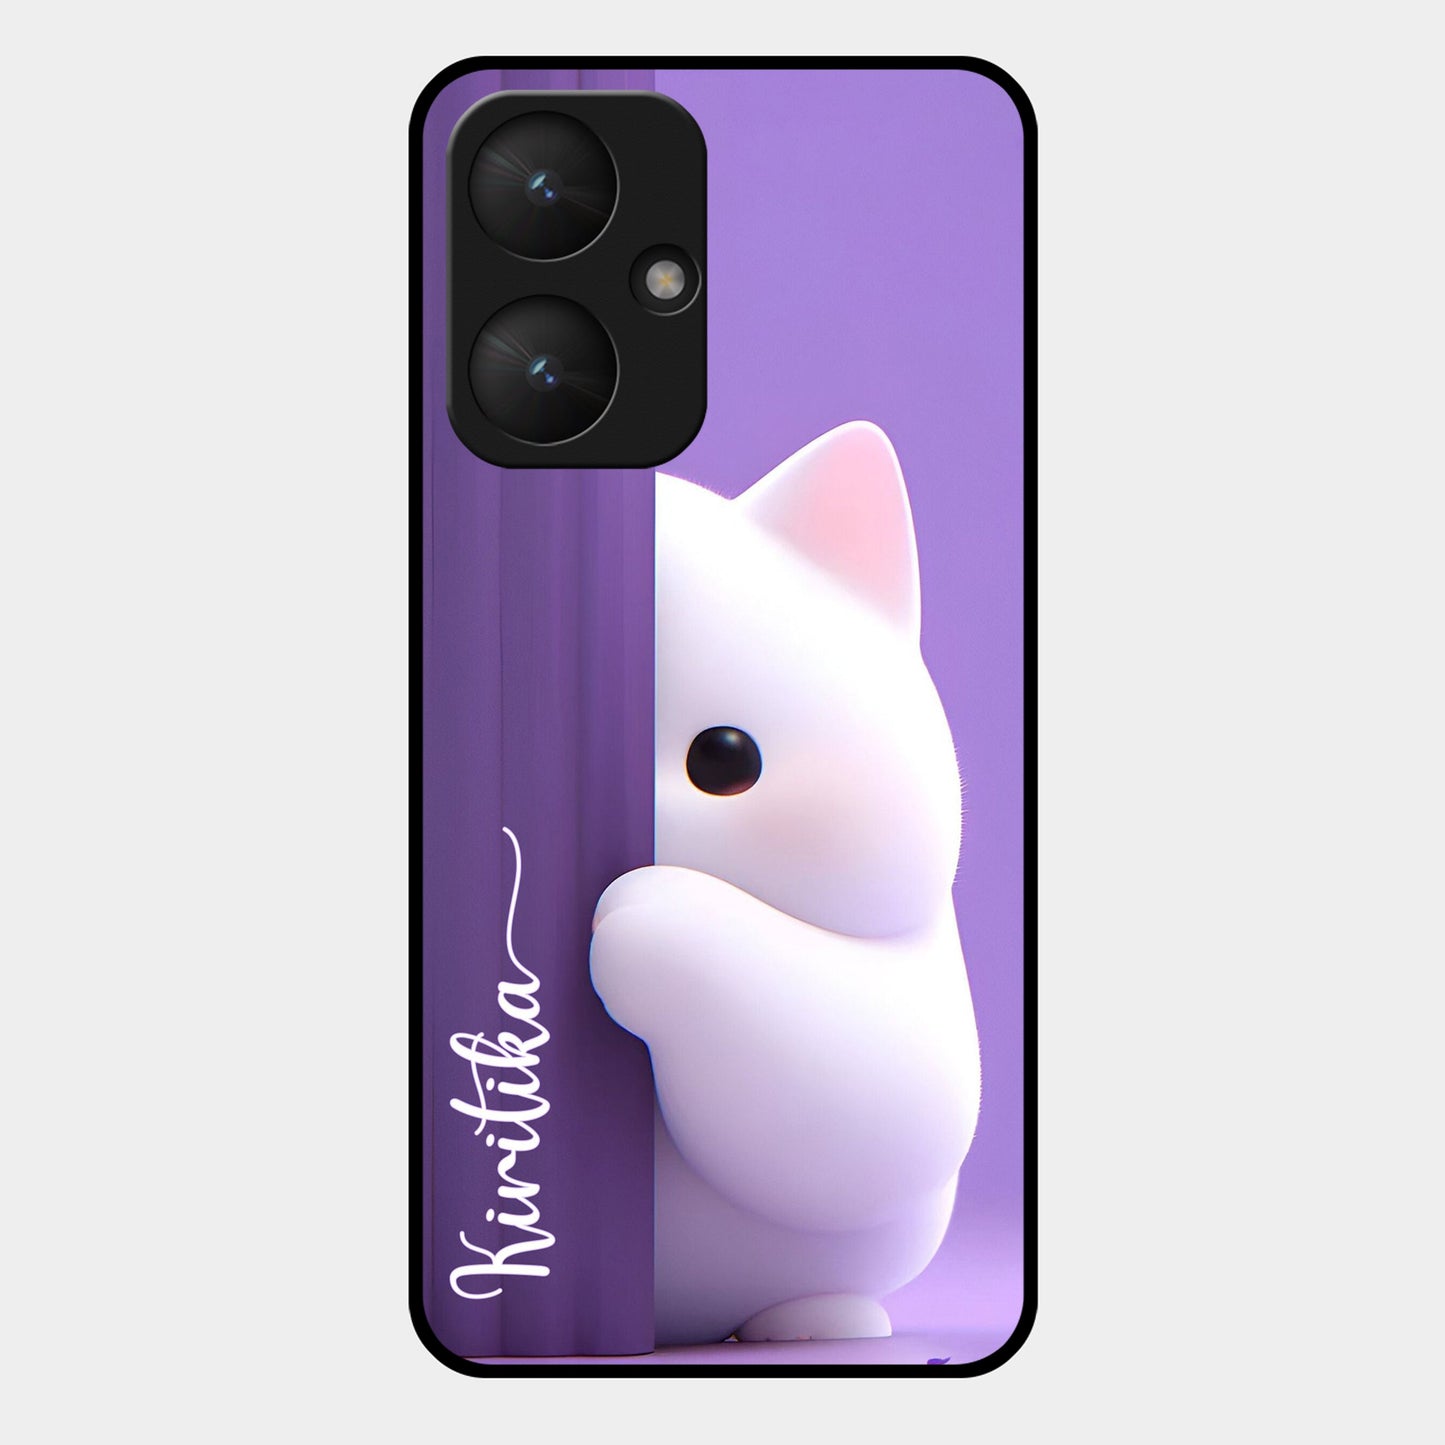 Cute Kittens Glossy Metal Case Cover For Redmi